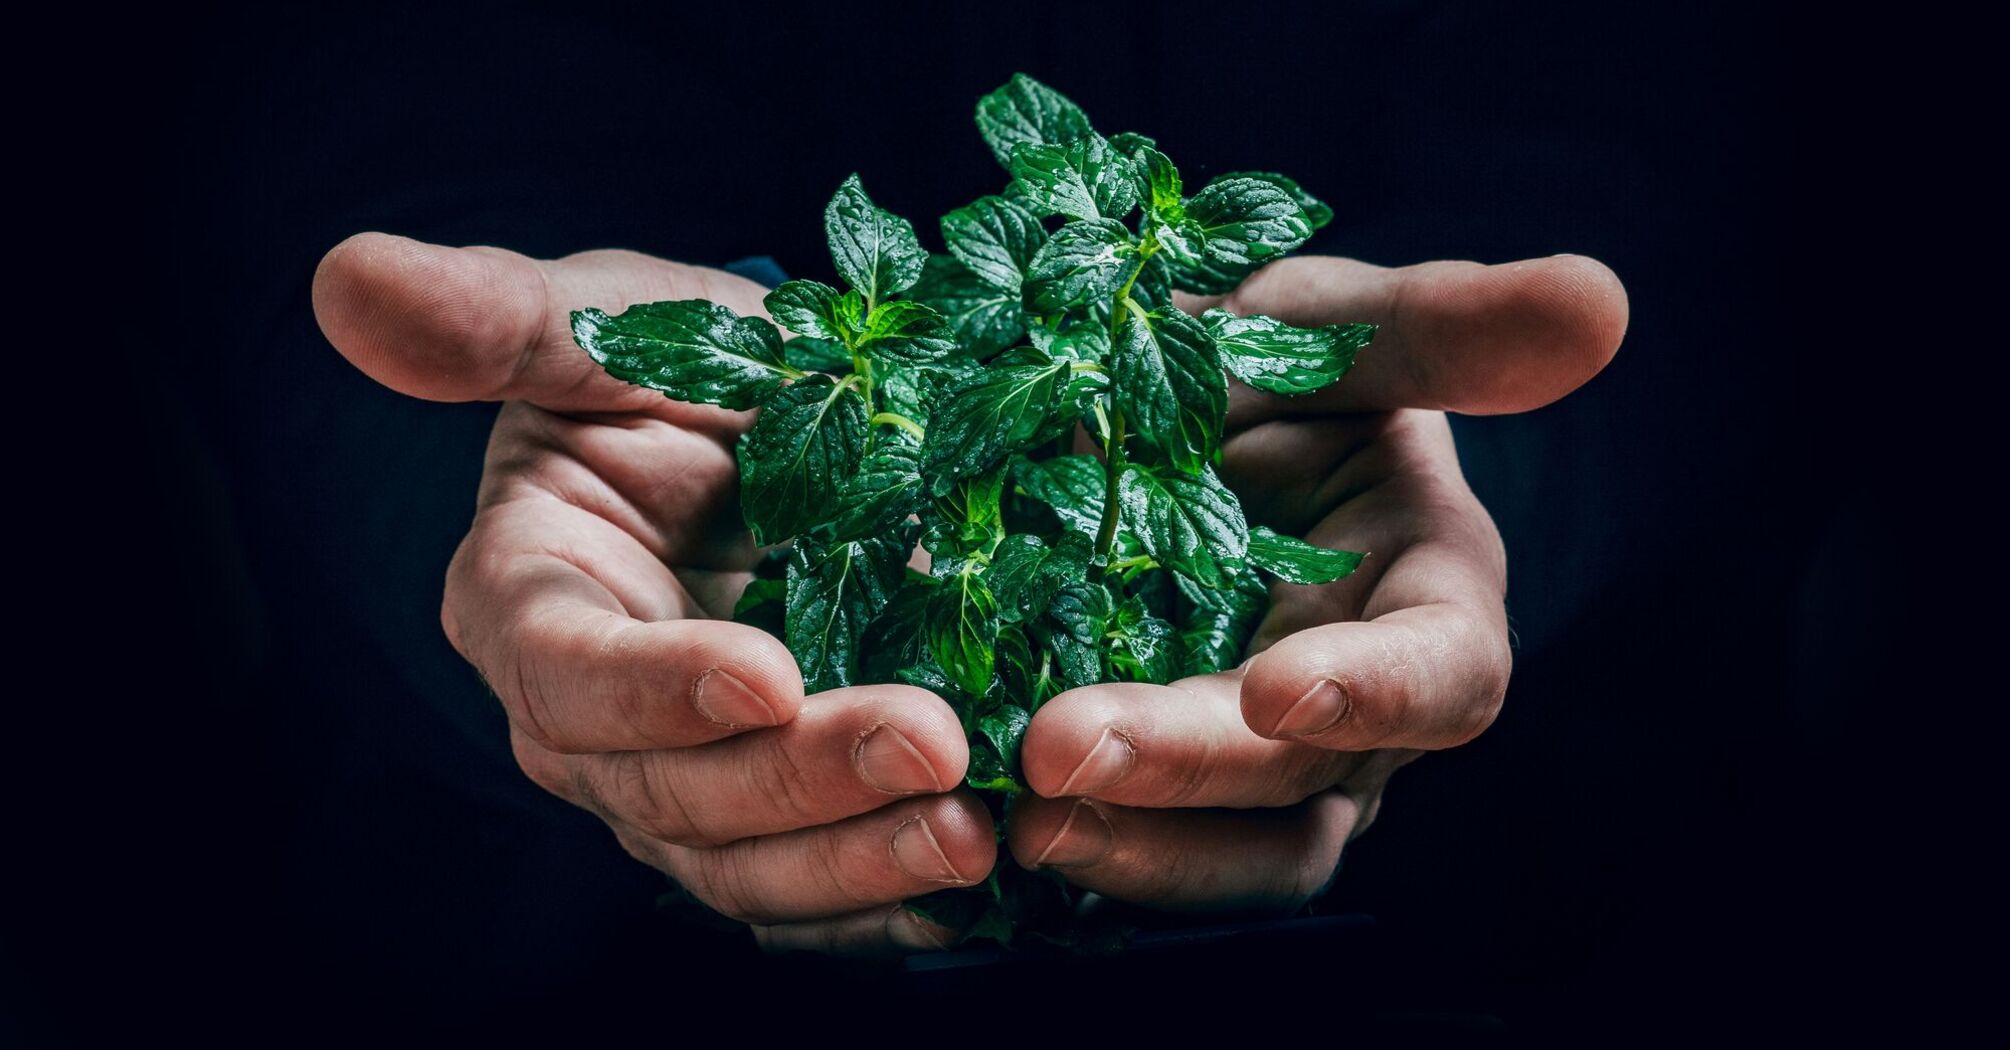 Hands holding a bunch of fresh mint leaves on a dark background